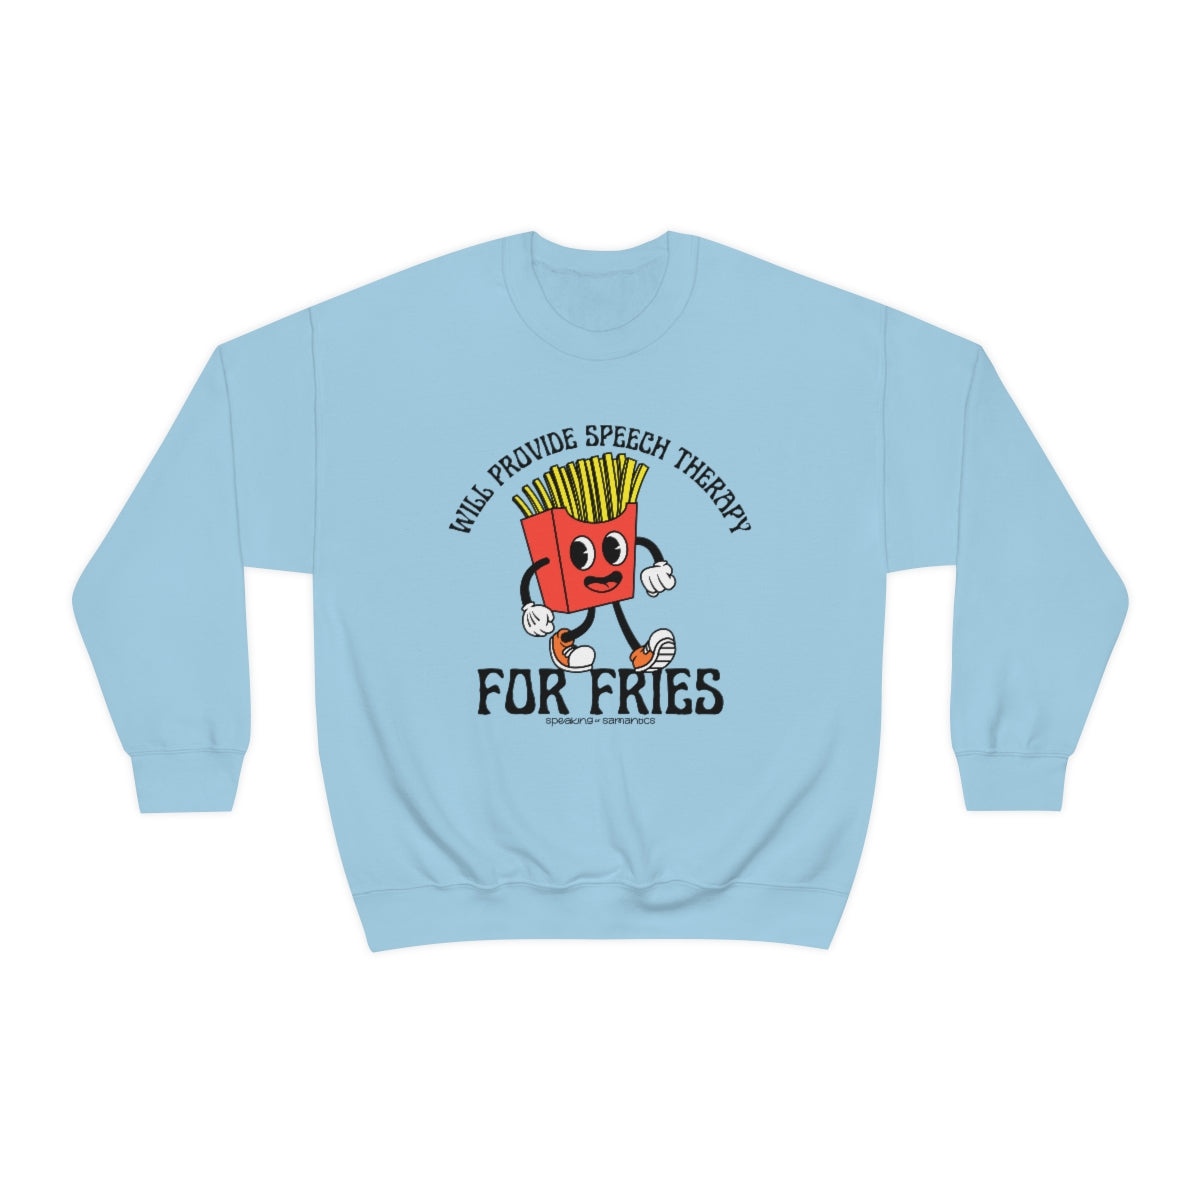 Will Provide Speech Therapy For Fries Crewneck